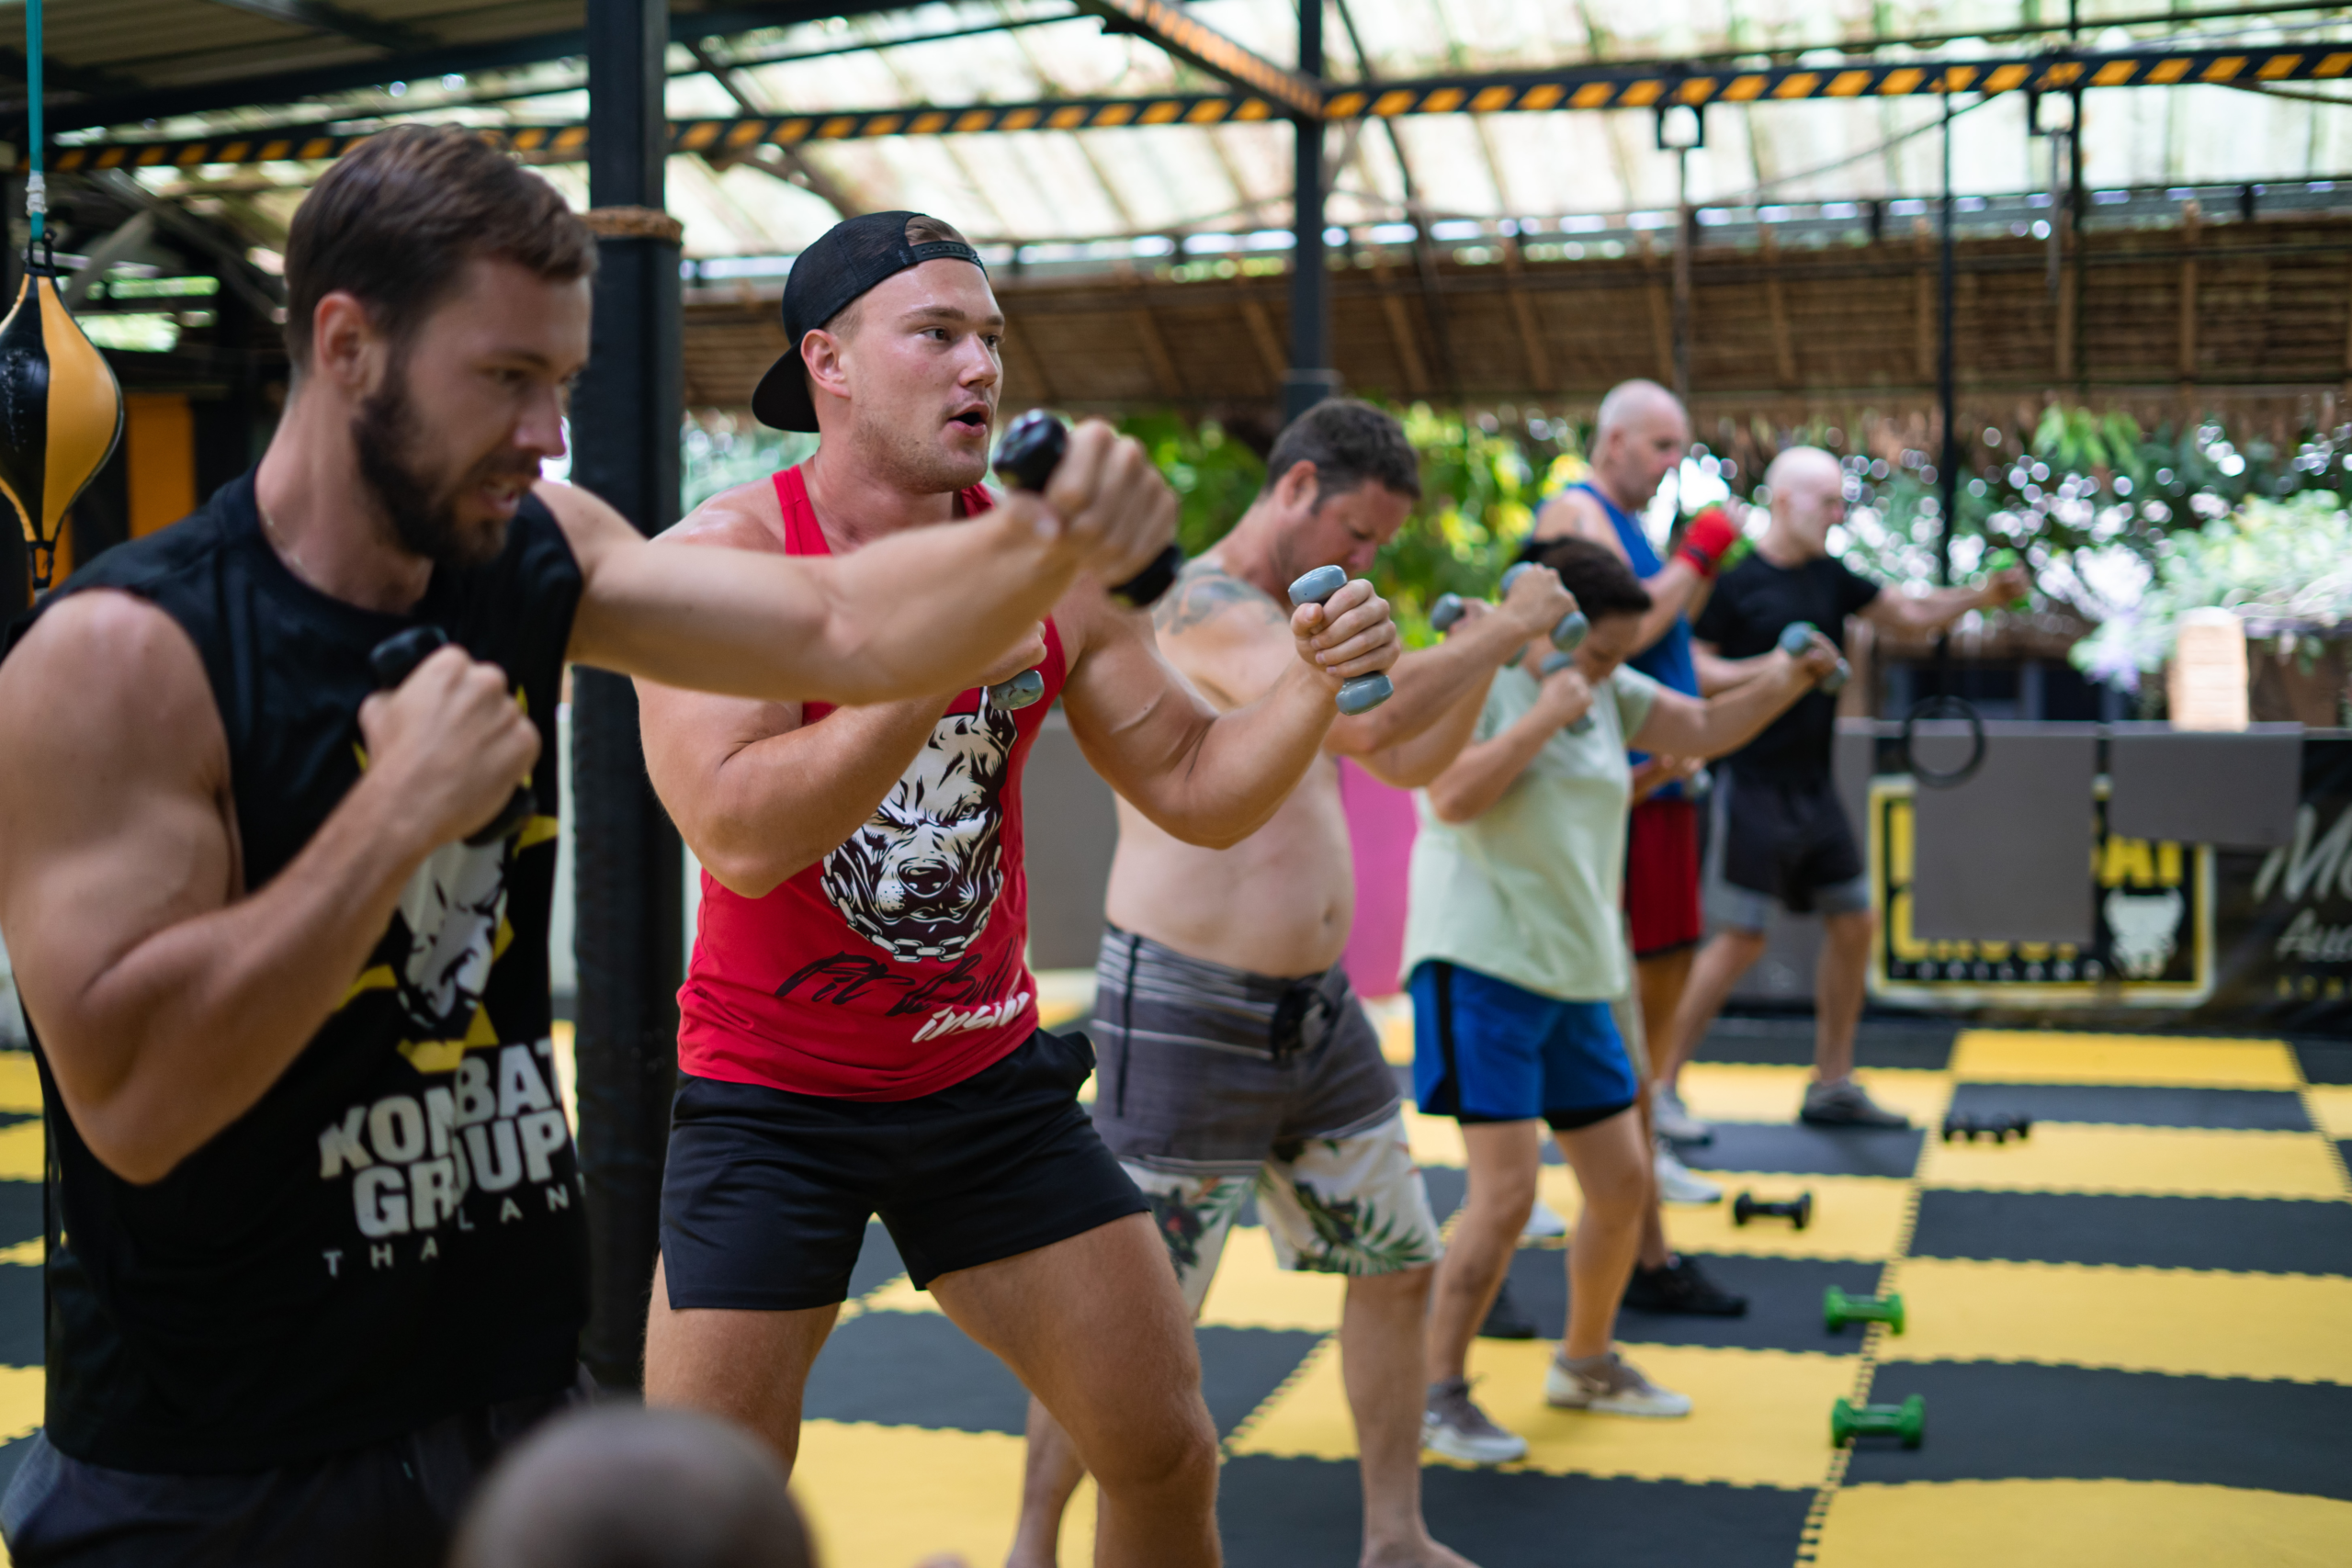 A diverse group of individuals practicing boxing punches in a gym with a focus on technique and form, as they train on a yellow and black matted floor.